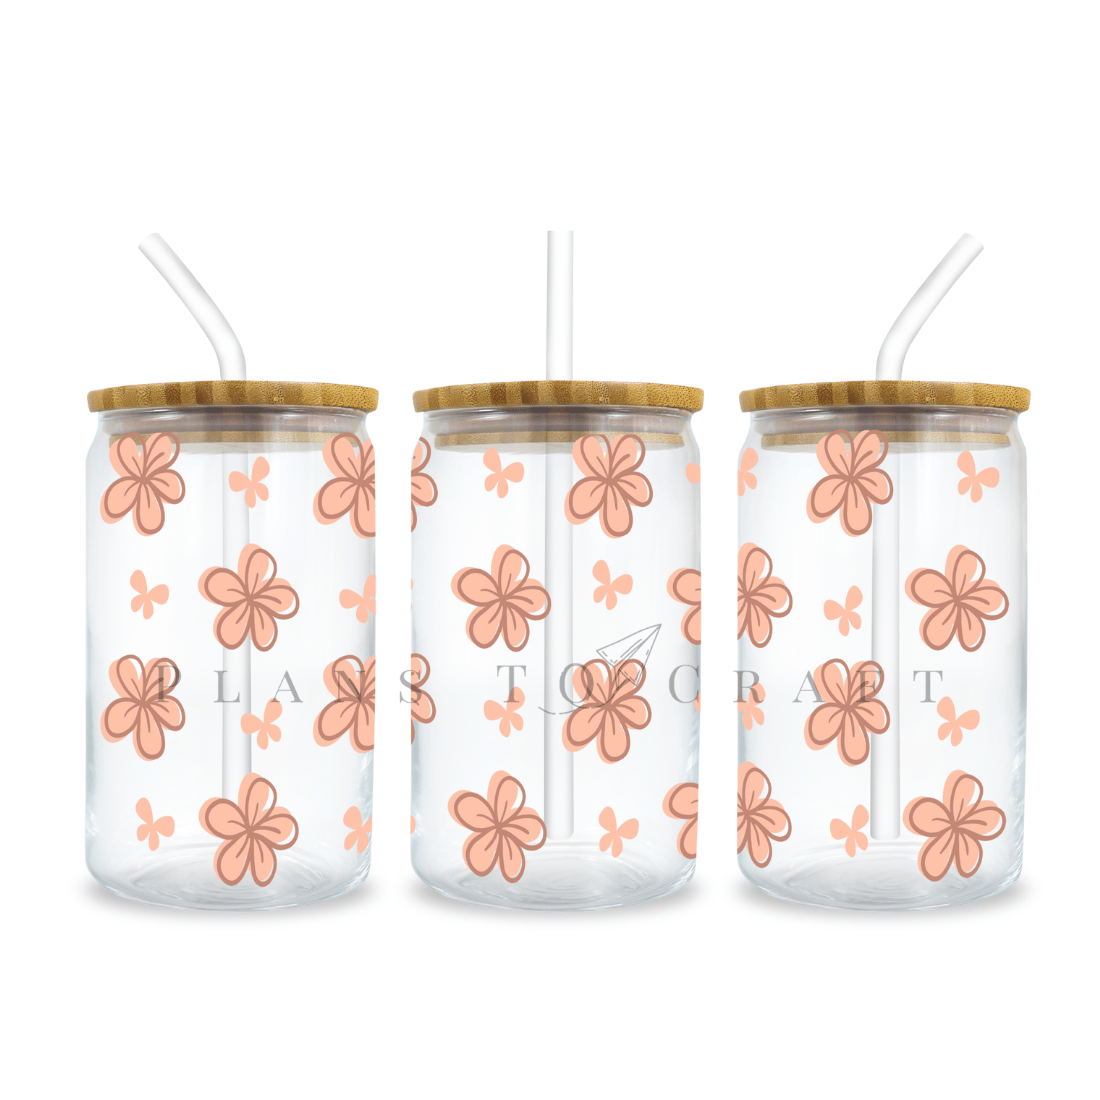 Three glass tumblers with flowers on them.